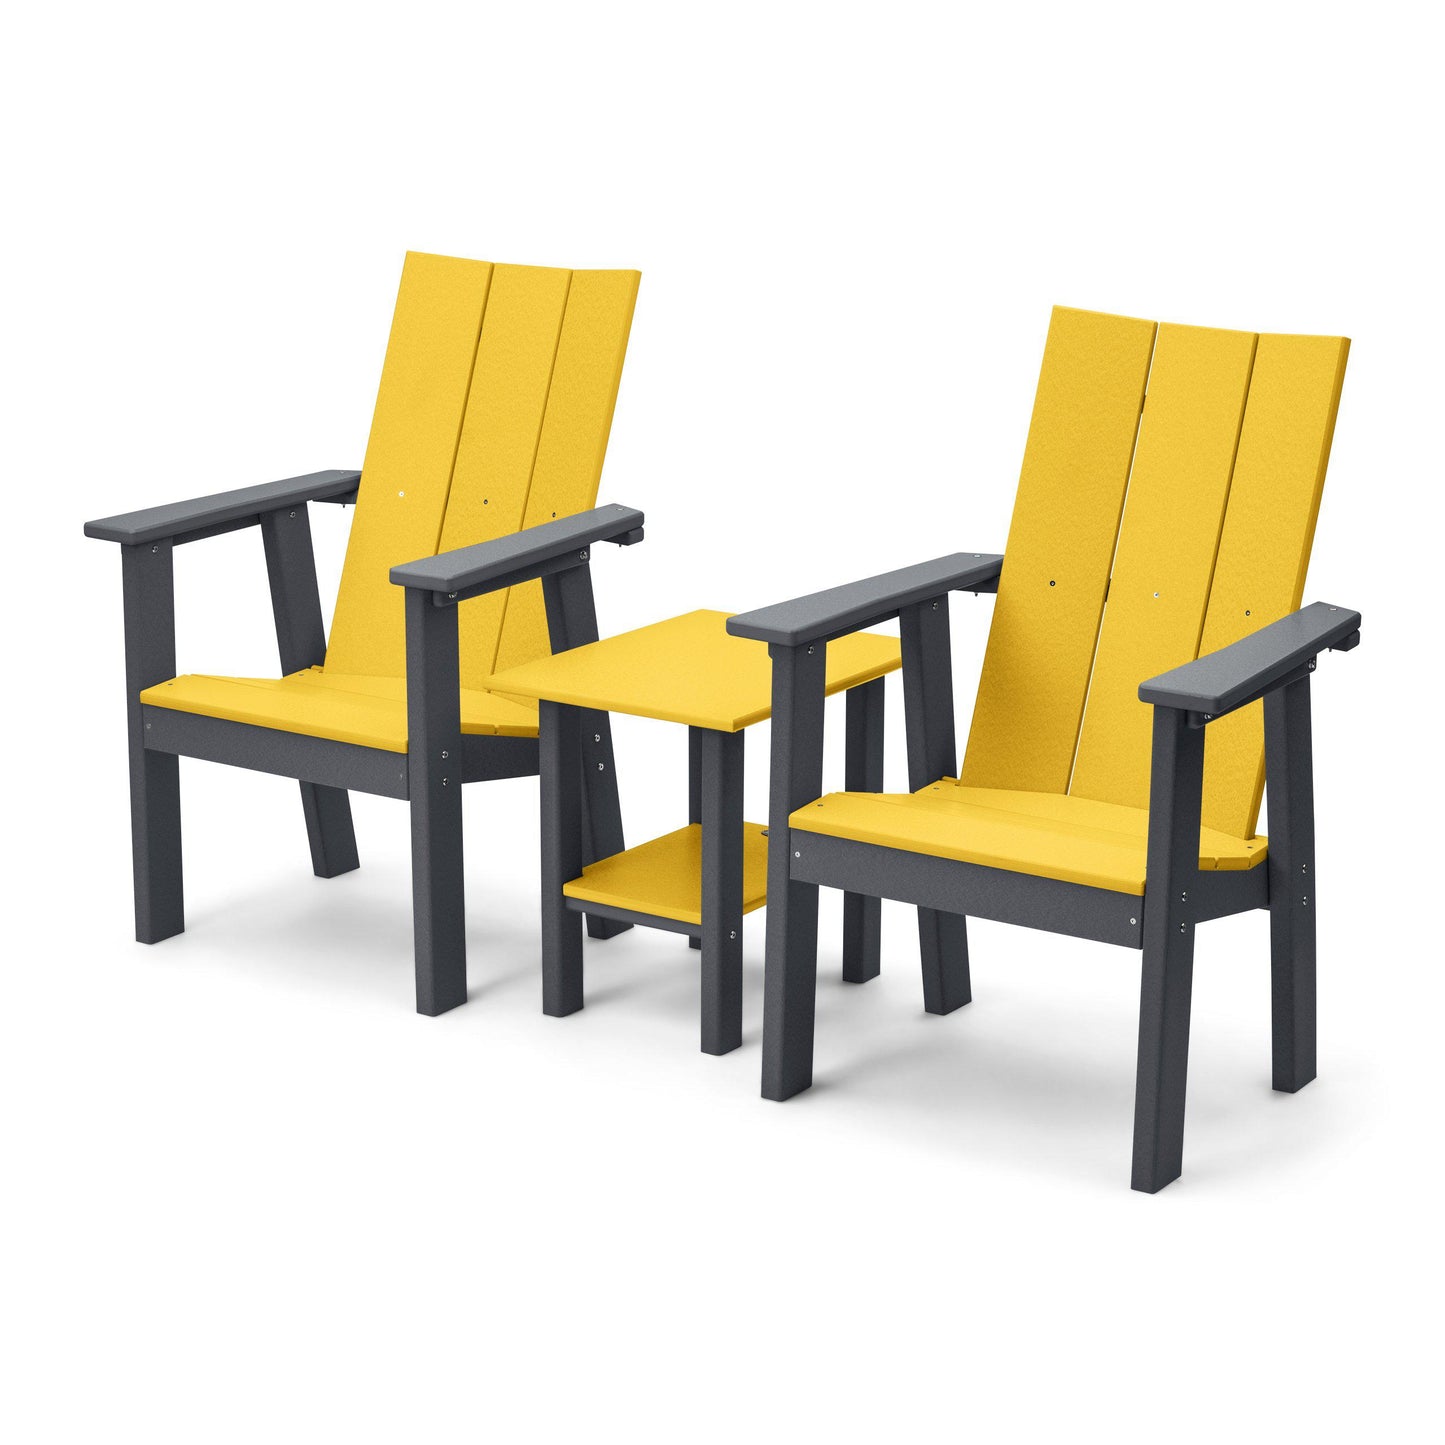 Perfect Choice Outdoor Furniture Recycled Plastic Stanton Upright Adirondack Chair Set - LEAD TIME TO SHIP 4 WEEKS OR LESS